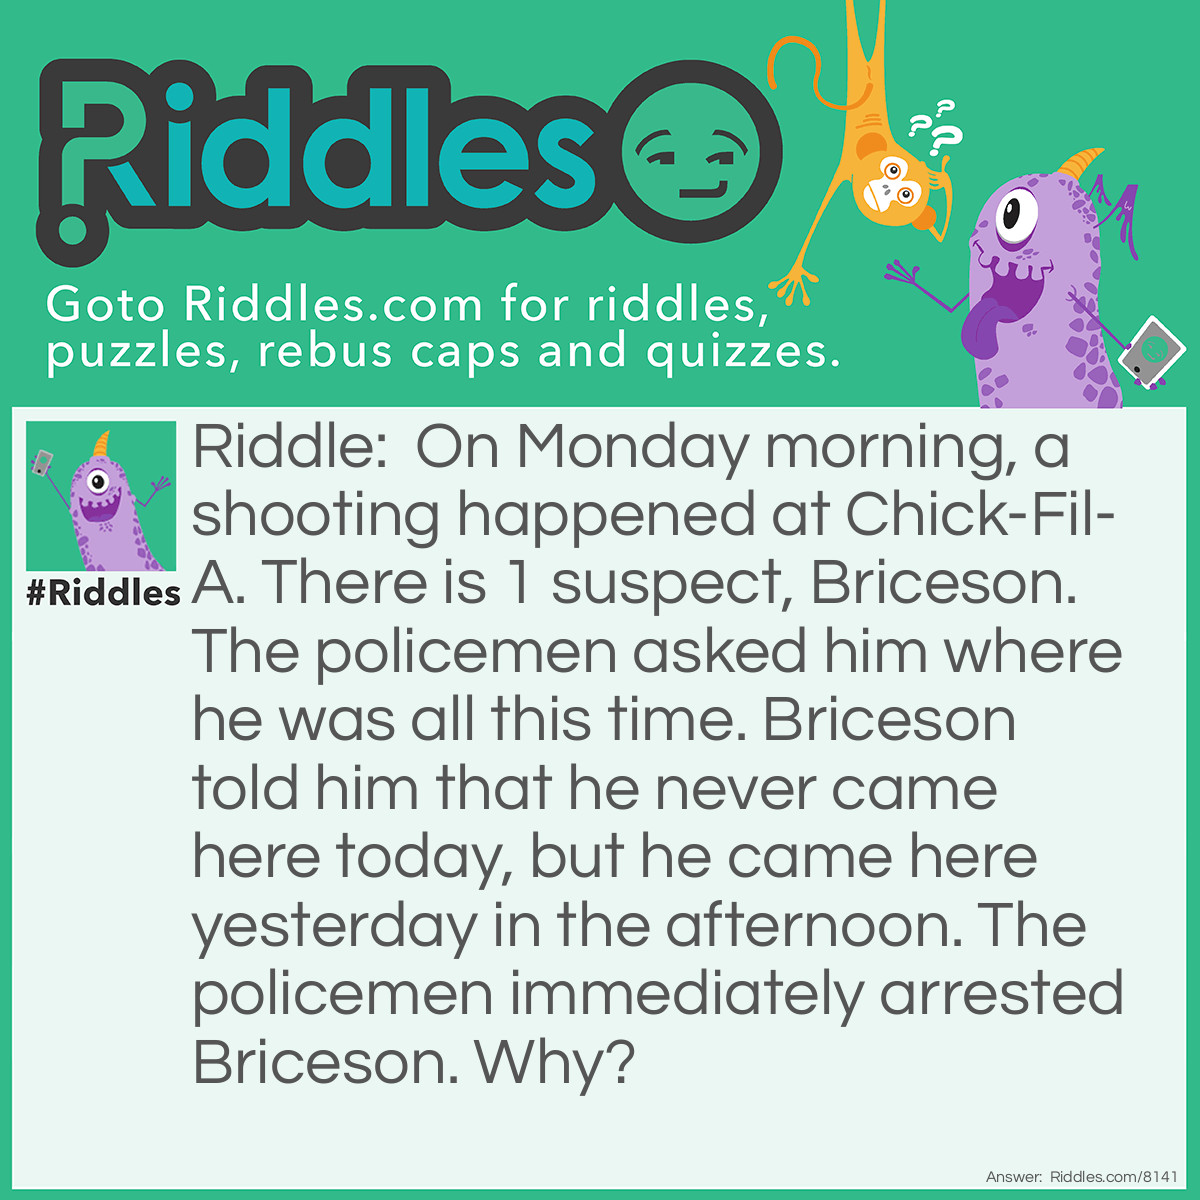 Riddle: On Monday morning, a shooting happened at Chick-Fil-A. There is 1 suspect, Briceson. The policemen asked him where he was all this time. Briceson told him that he never came here today, but he came here yesterday in the afternoon. The policemen immediately arrested Briceson. Why? Answer: Yesterday was Sunday. Chick-Fil-A doesn't open on Sundays.